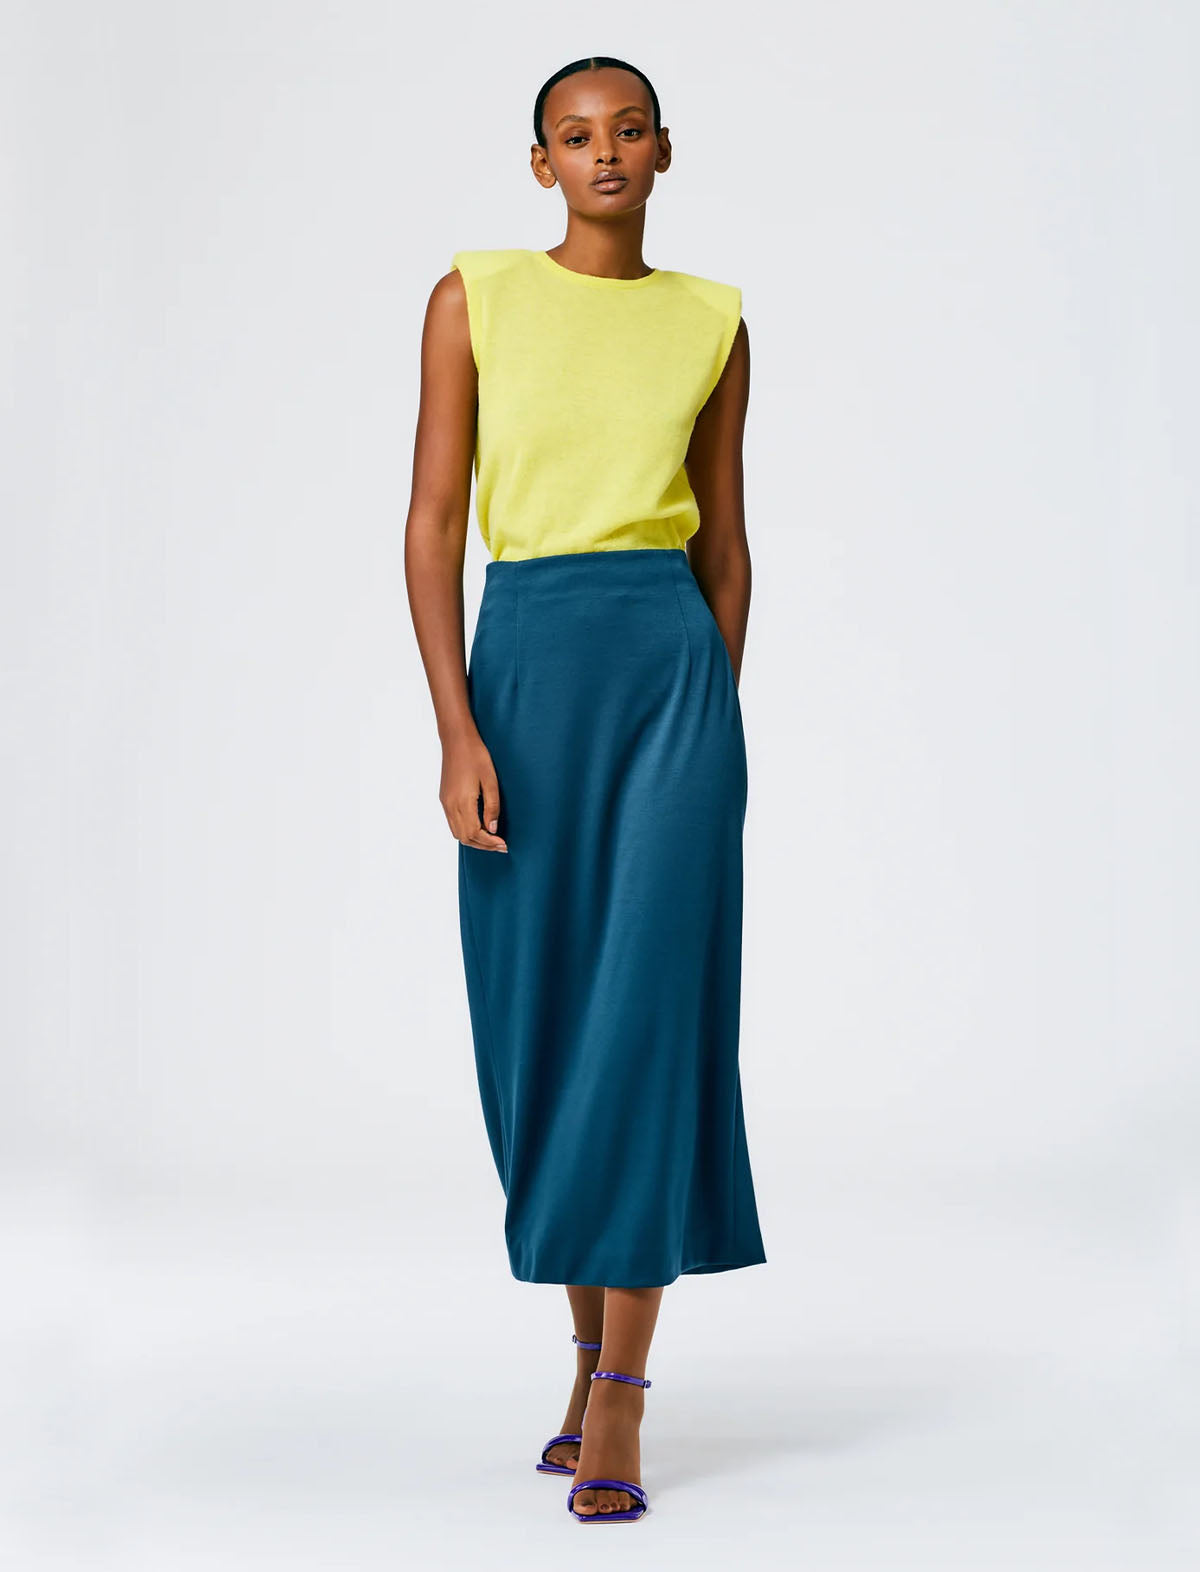 Tibi Structured Knit Pencil Skirt in Azure